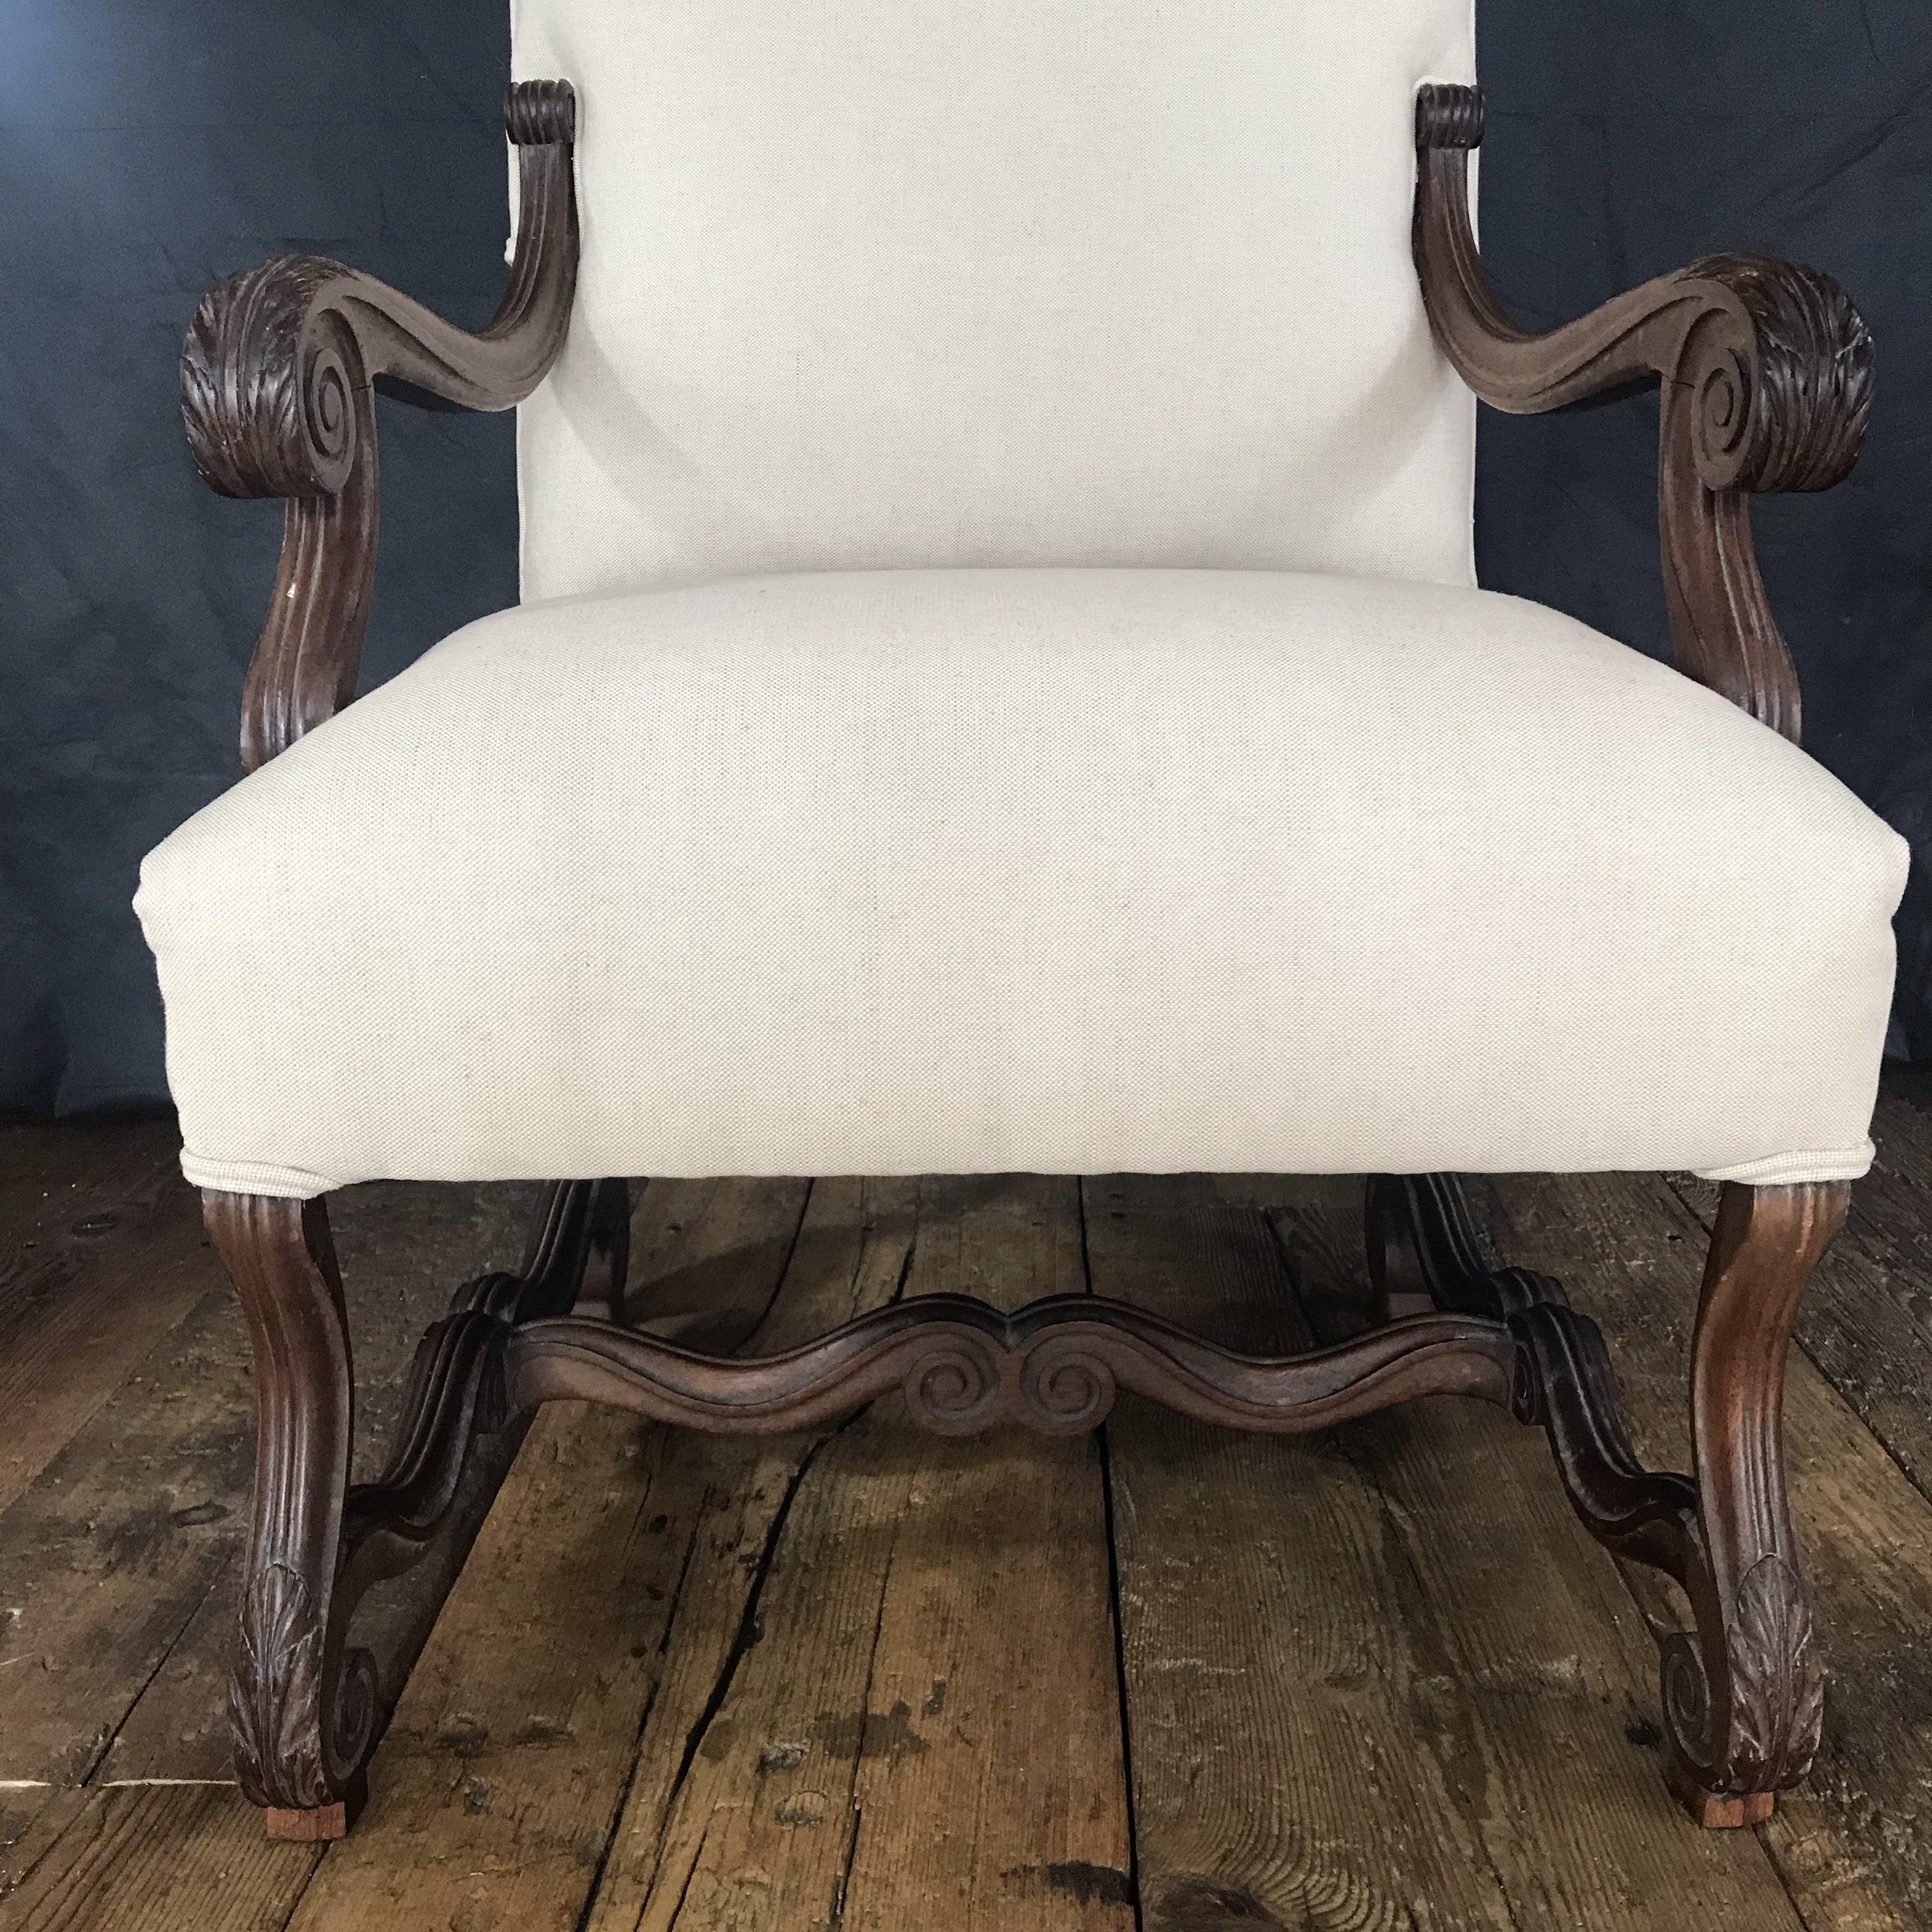 Beautiful French walnut Louis XV armchair with creamy new upholstery will look beautiful at the end of a dining table or in any living room or bedroom.

#4650.